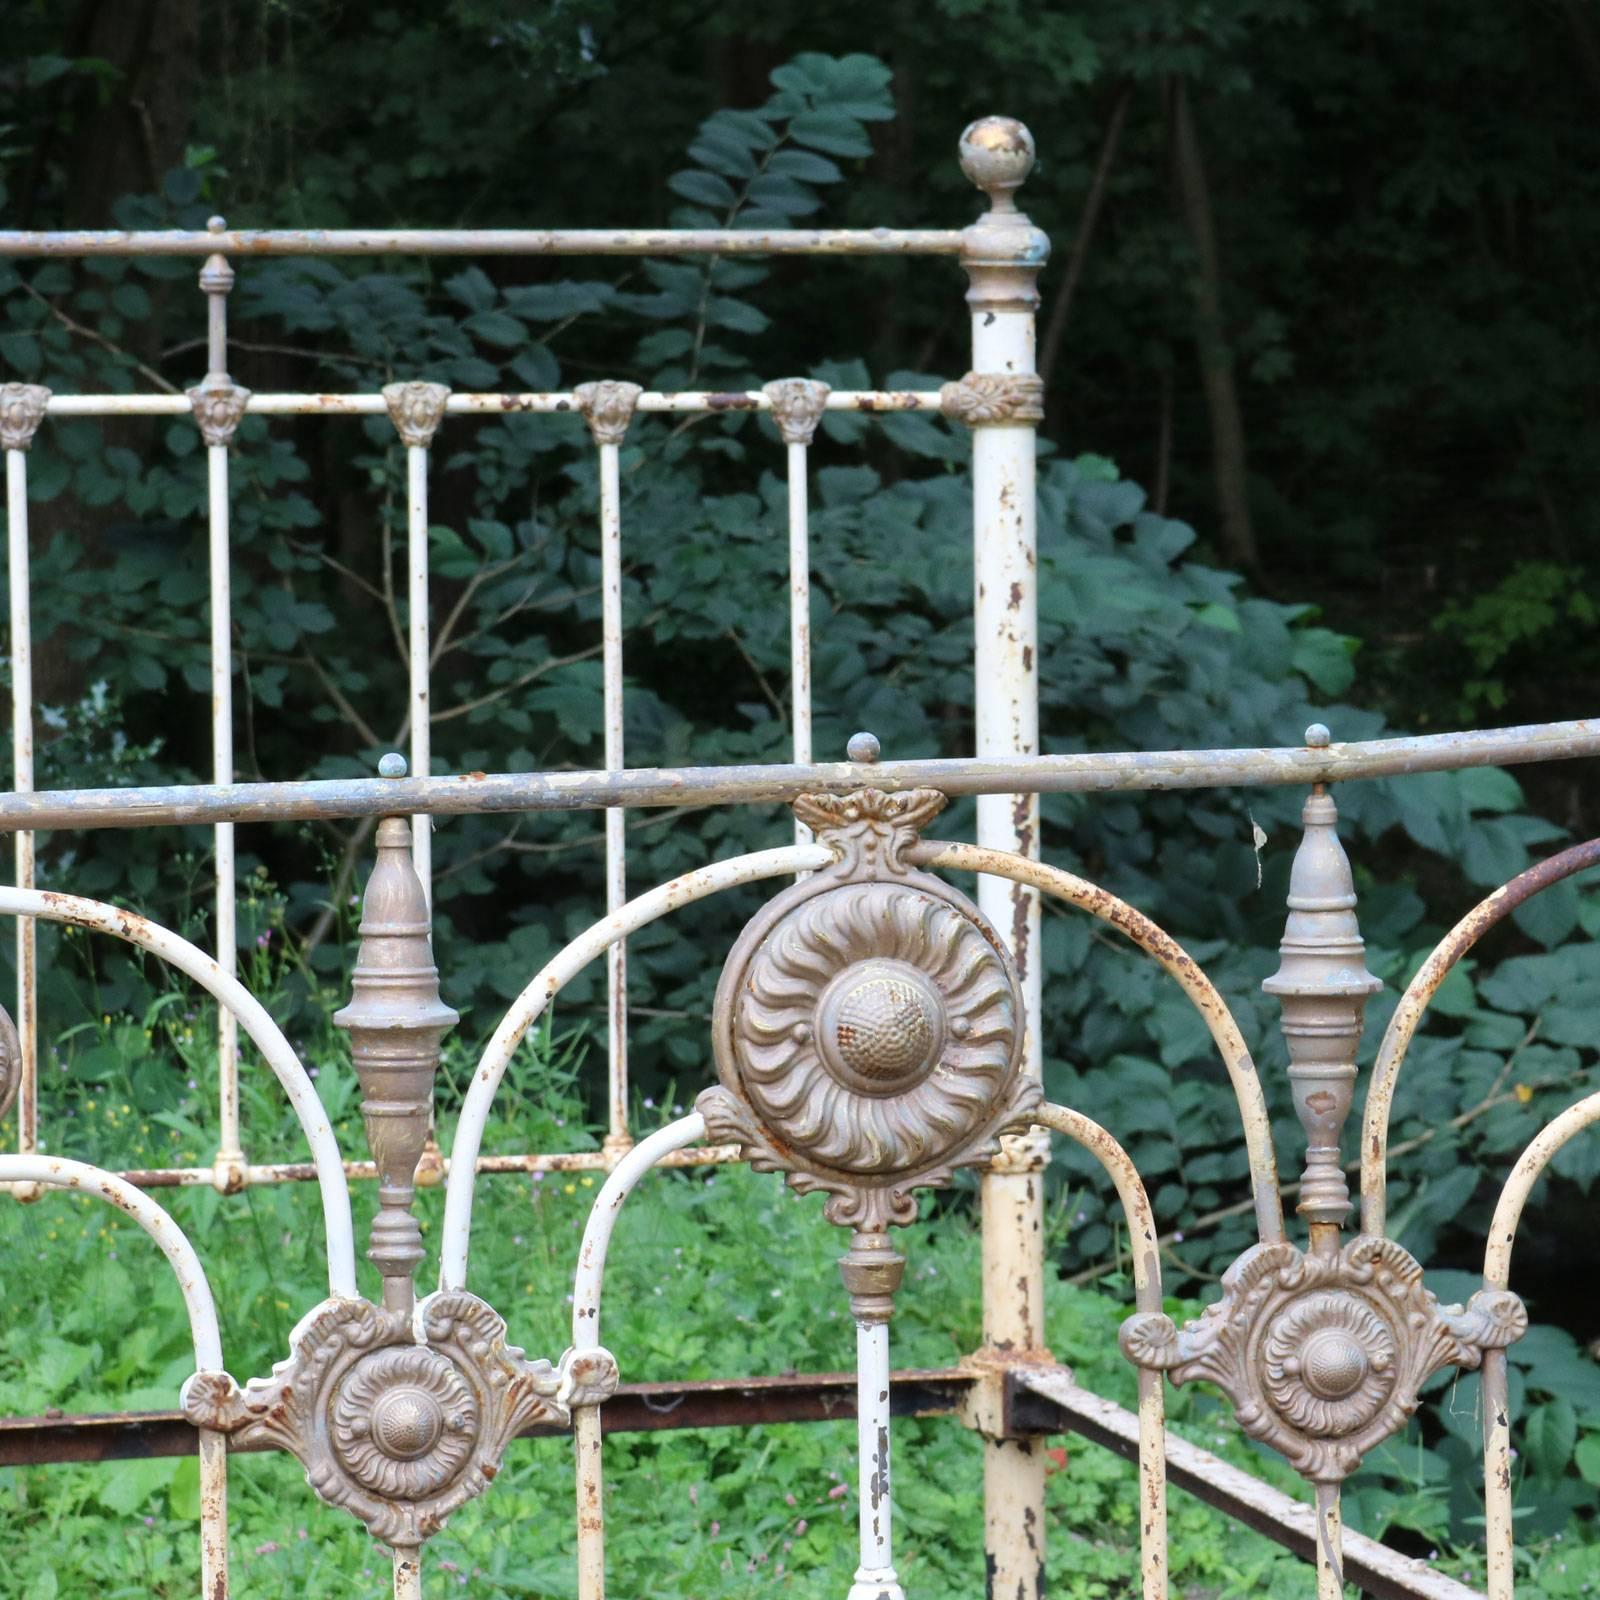 A brass and iron bed iron bed from the late Victorian era with superb castings and sunflower brass rosettes.

The bed will be fully restored in a color of your choice and extended to 60 inches wide, to accept a British king-size or American